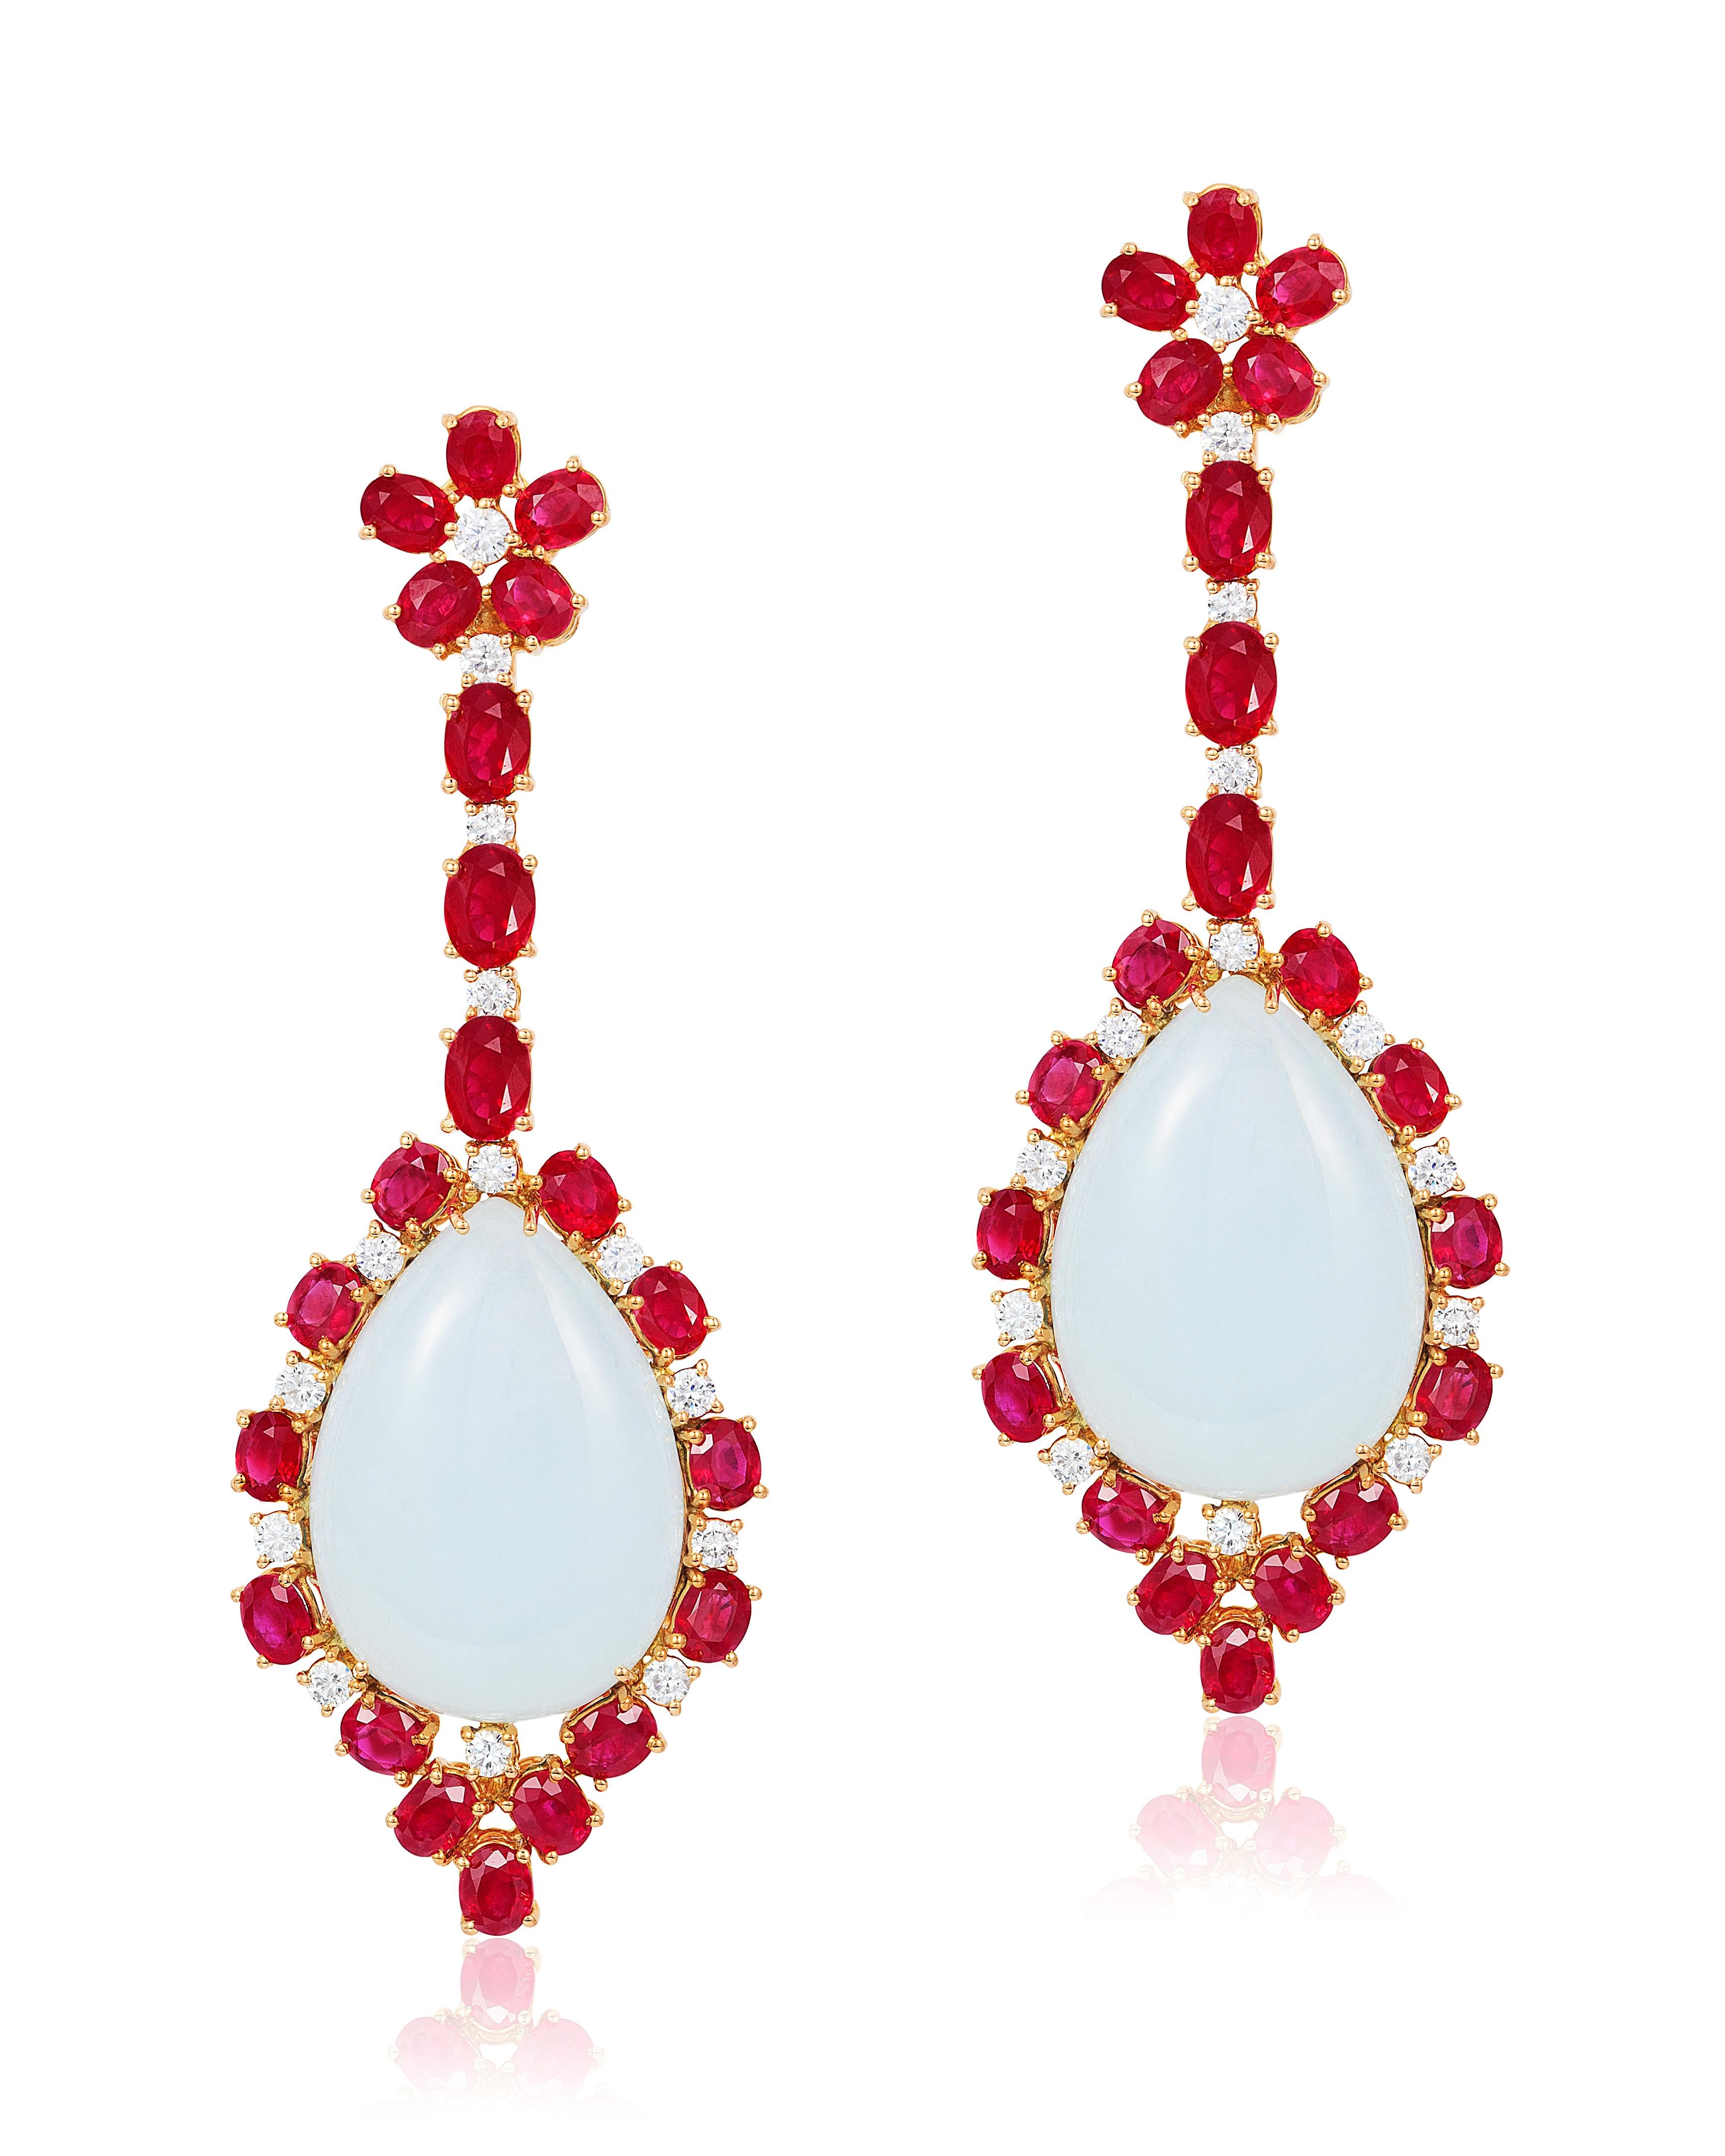 Andreoli Ruby Jade Drop Earrings 18 Karat Rose Gold. these earrings feature 42 oval cut ruby weighing 13.16 carats. Two Jade center stones weighing 39.00 carats. 28 Brilliant cut diamonds, F-G-H Color, VS-SI Clarity. = Set in 20.20 grams of 18 Karat